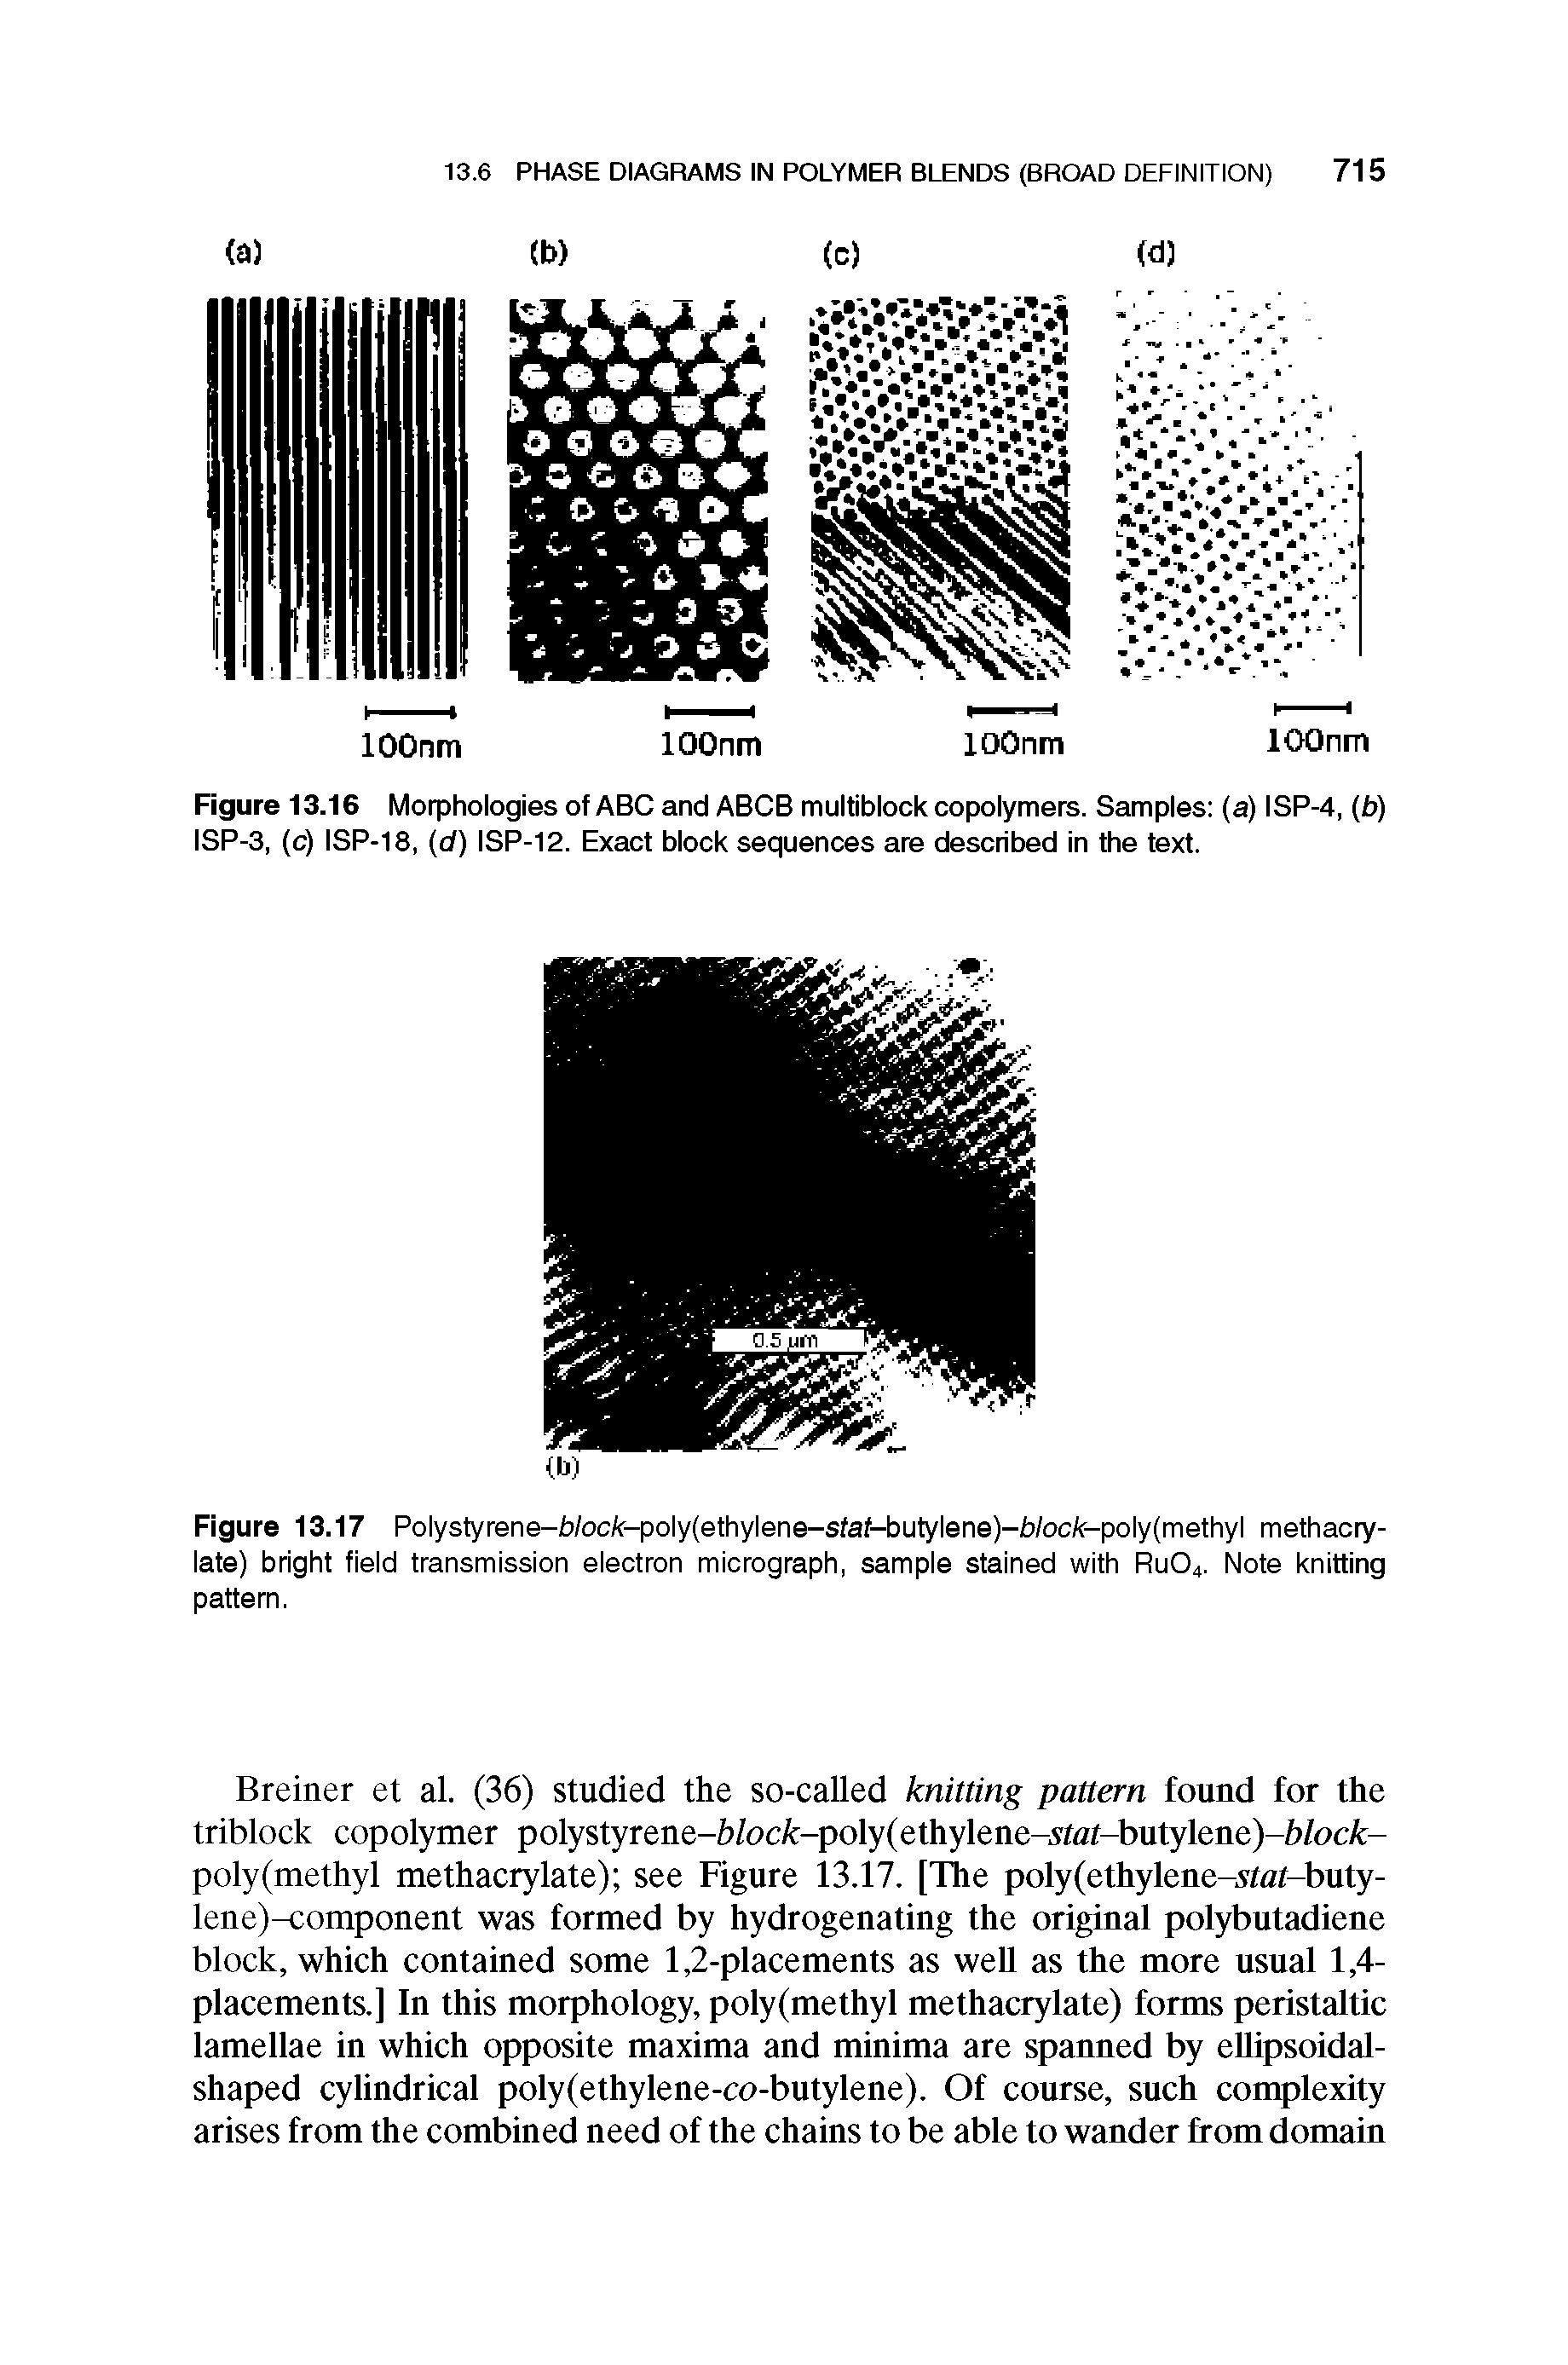 Figure 13.17 Polystyrene-Woc/c-poly(ethylene-sfaf-butylene)-Woc/c-poly(methyl methacrylate) bright field transmission electron micrograph, sample stained with RUO4. Note knitting pattern.